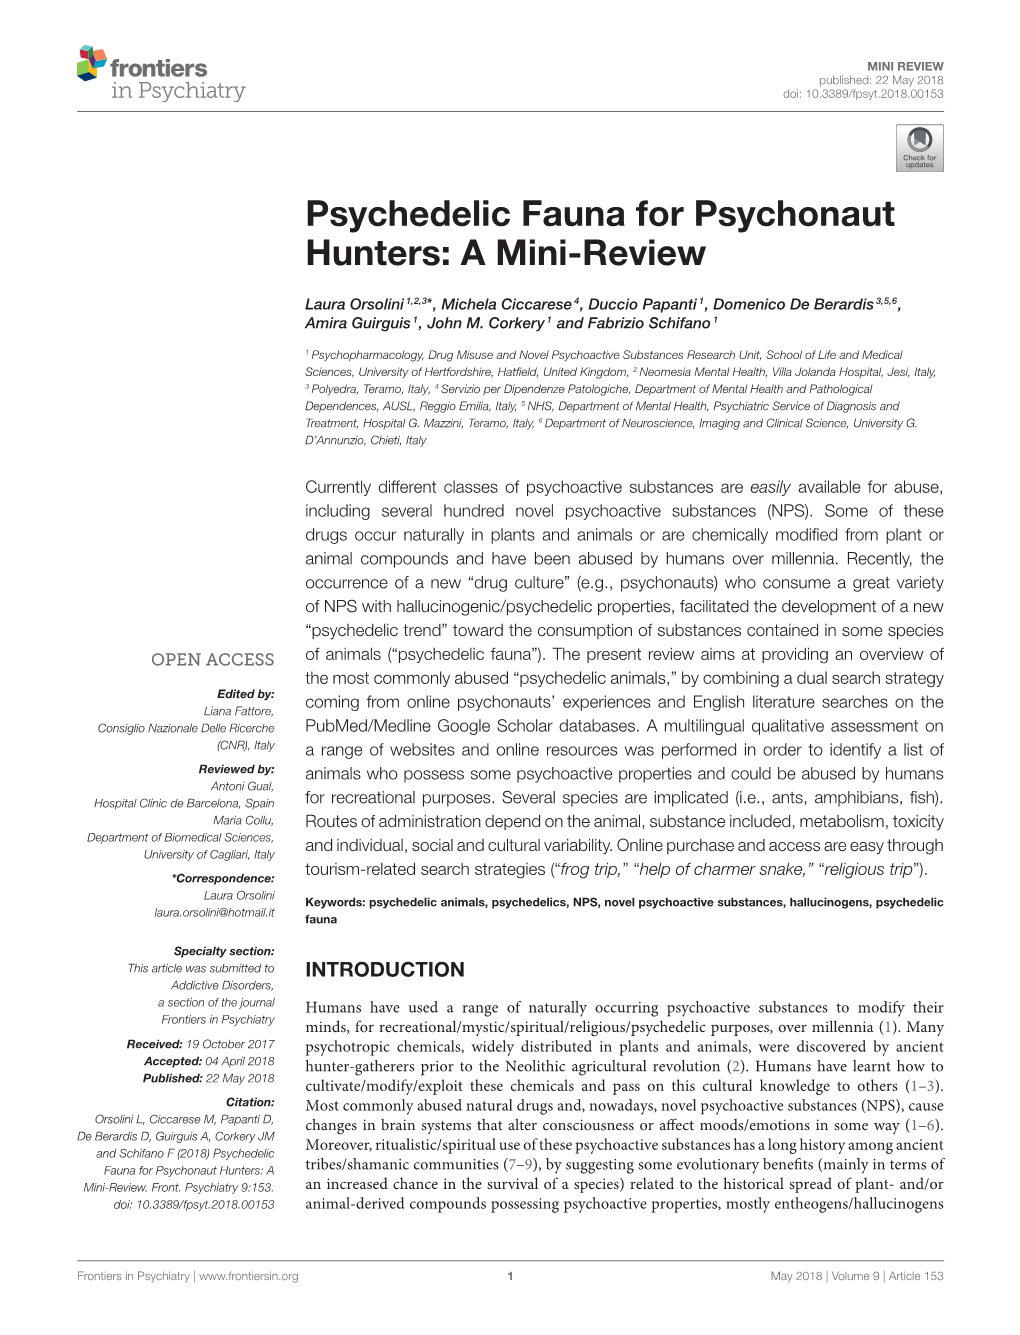 Psychedelic Fauna for Psychonaut Hunters: a Mini-Review